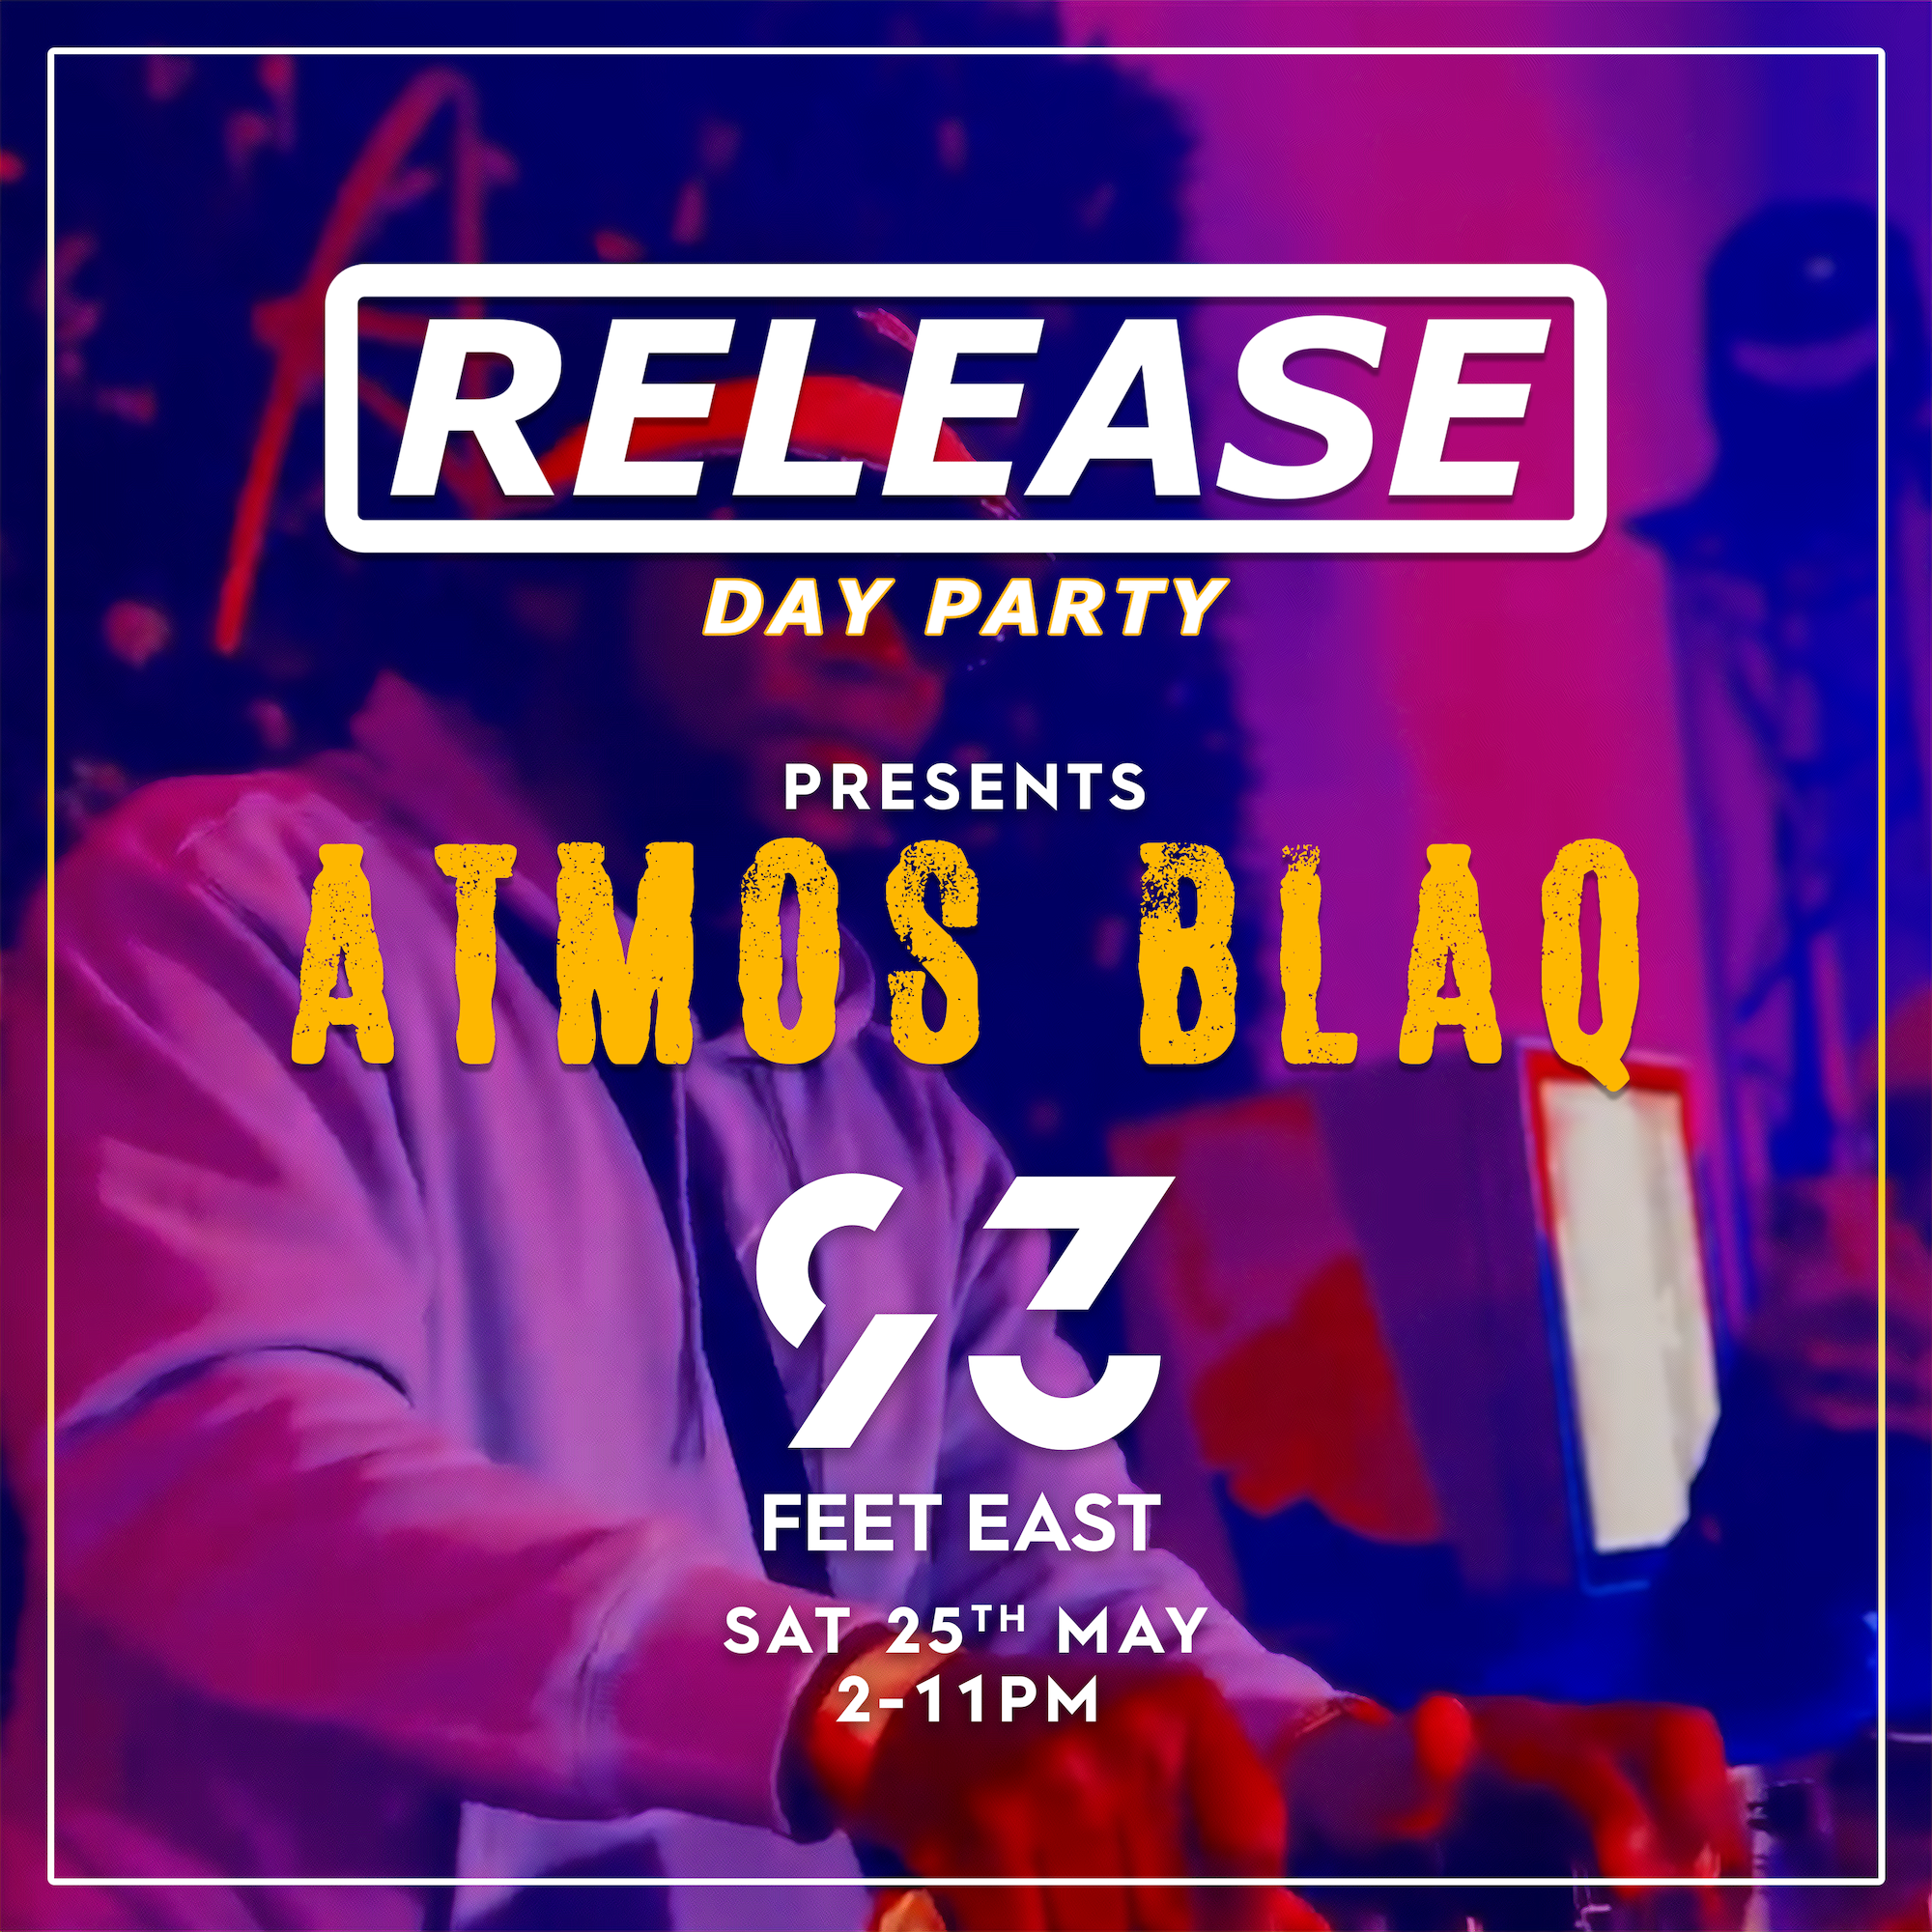 Release Day Party presents Atmos Blaq  - フライヤー表